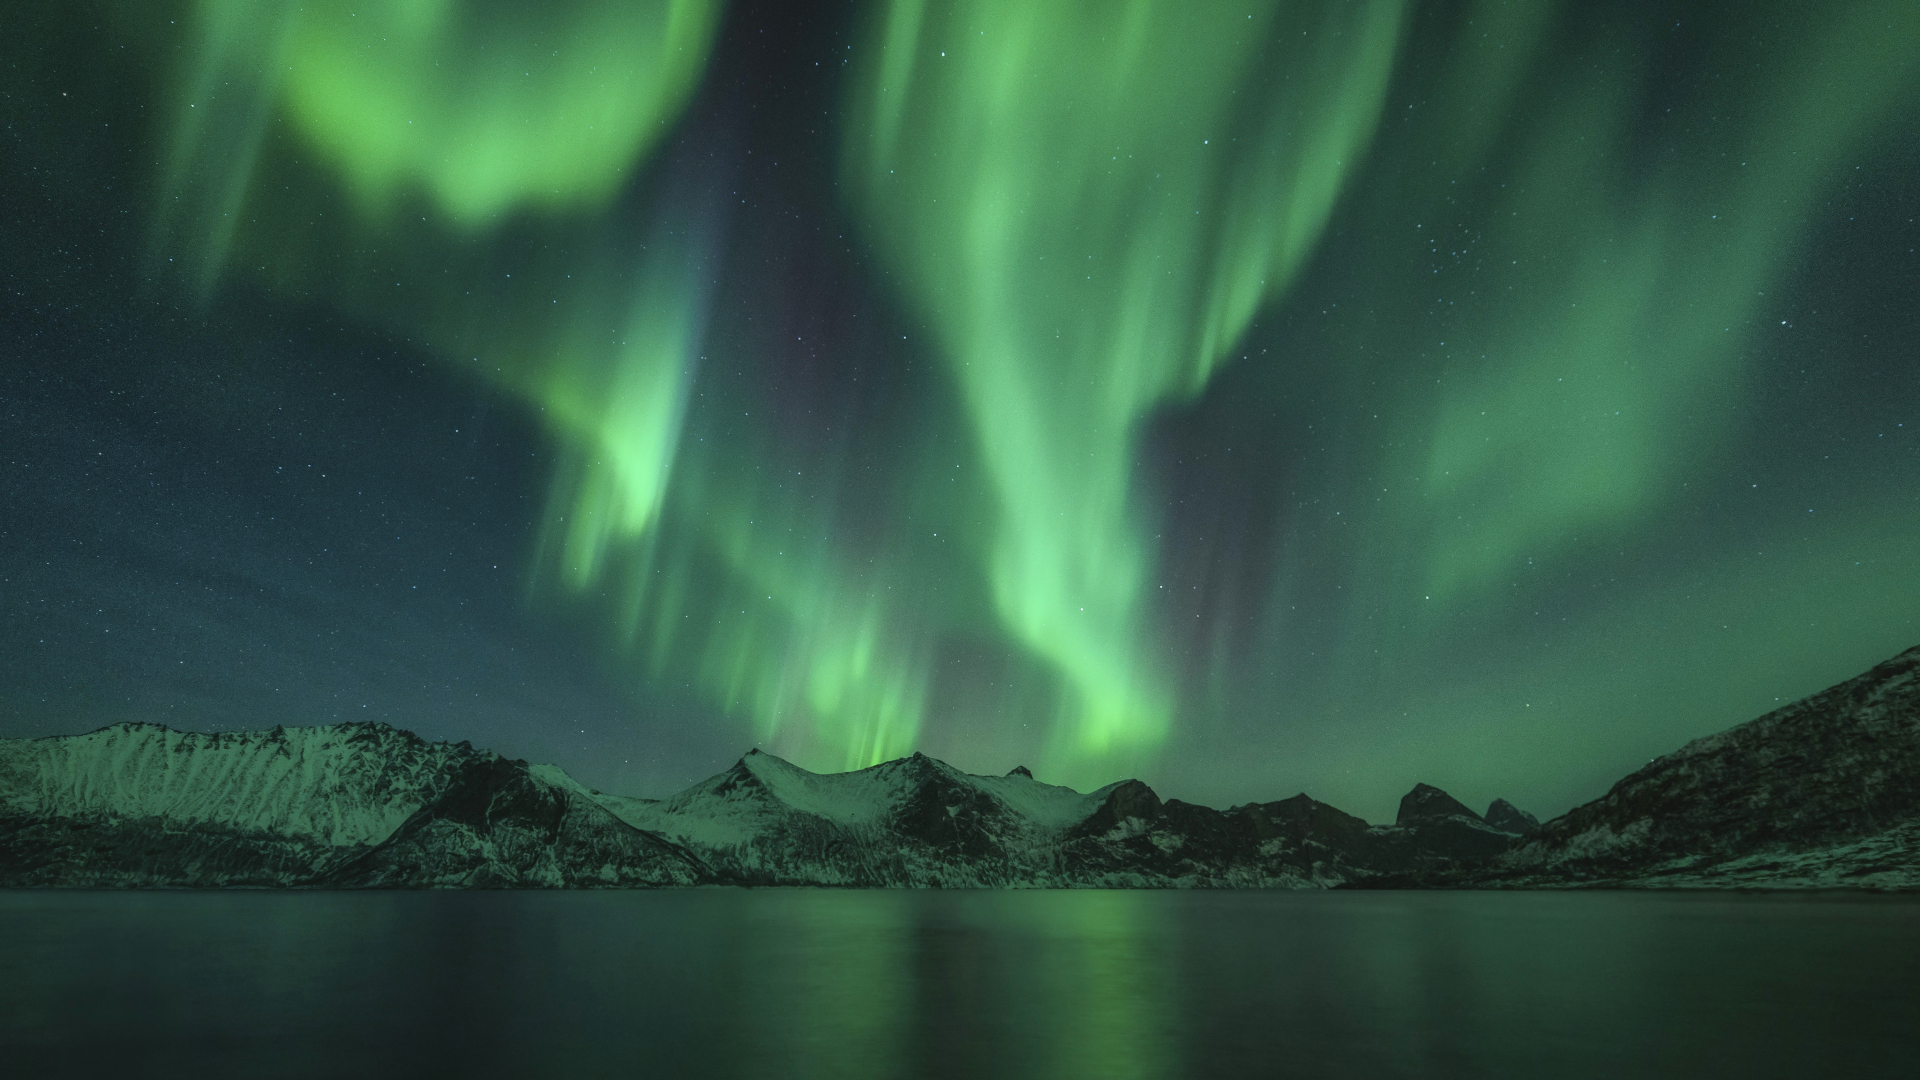 Aurora hunting: What it’s like to chase the northern lights along Norway’s dramatic coastline